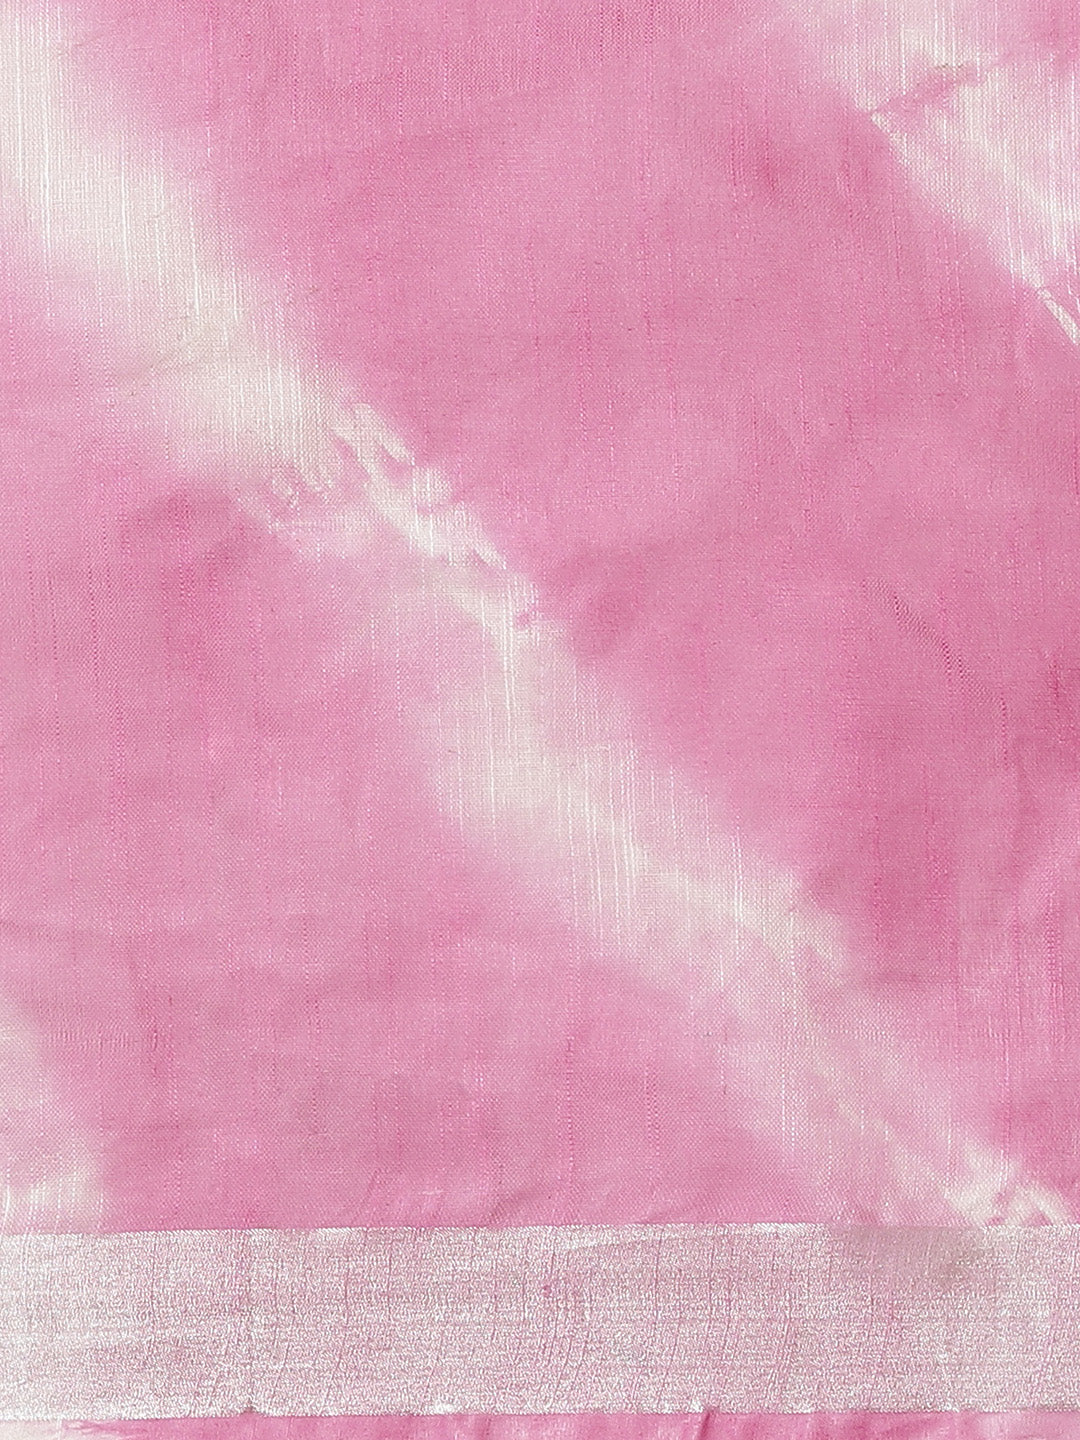 Pink and White, Kalakari India Linen Shibori Woven Saree and Blouse ALBGSA0073-Saree-Kalakari India-ALBGSA0073-Cotton, Geographical Indication, Hand Crafted, Heritage Prints, Linen, Natural Dyes, Red, Sarees, Shibori, Sustainable Fabrics, Woven, Yellow-[Linen,Ethnic,wear,Fashionista,Handloom,Handicraft,Indigo,blockprint,block,print,Cotton,Chanderi,Blue, latest,classy,party,bollywood,trendy,summer,style,traditional,formal,elegant,unique,style,hand,block,print, dabu,booti,gift,present,glamorous,af